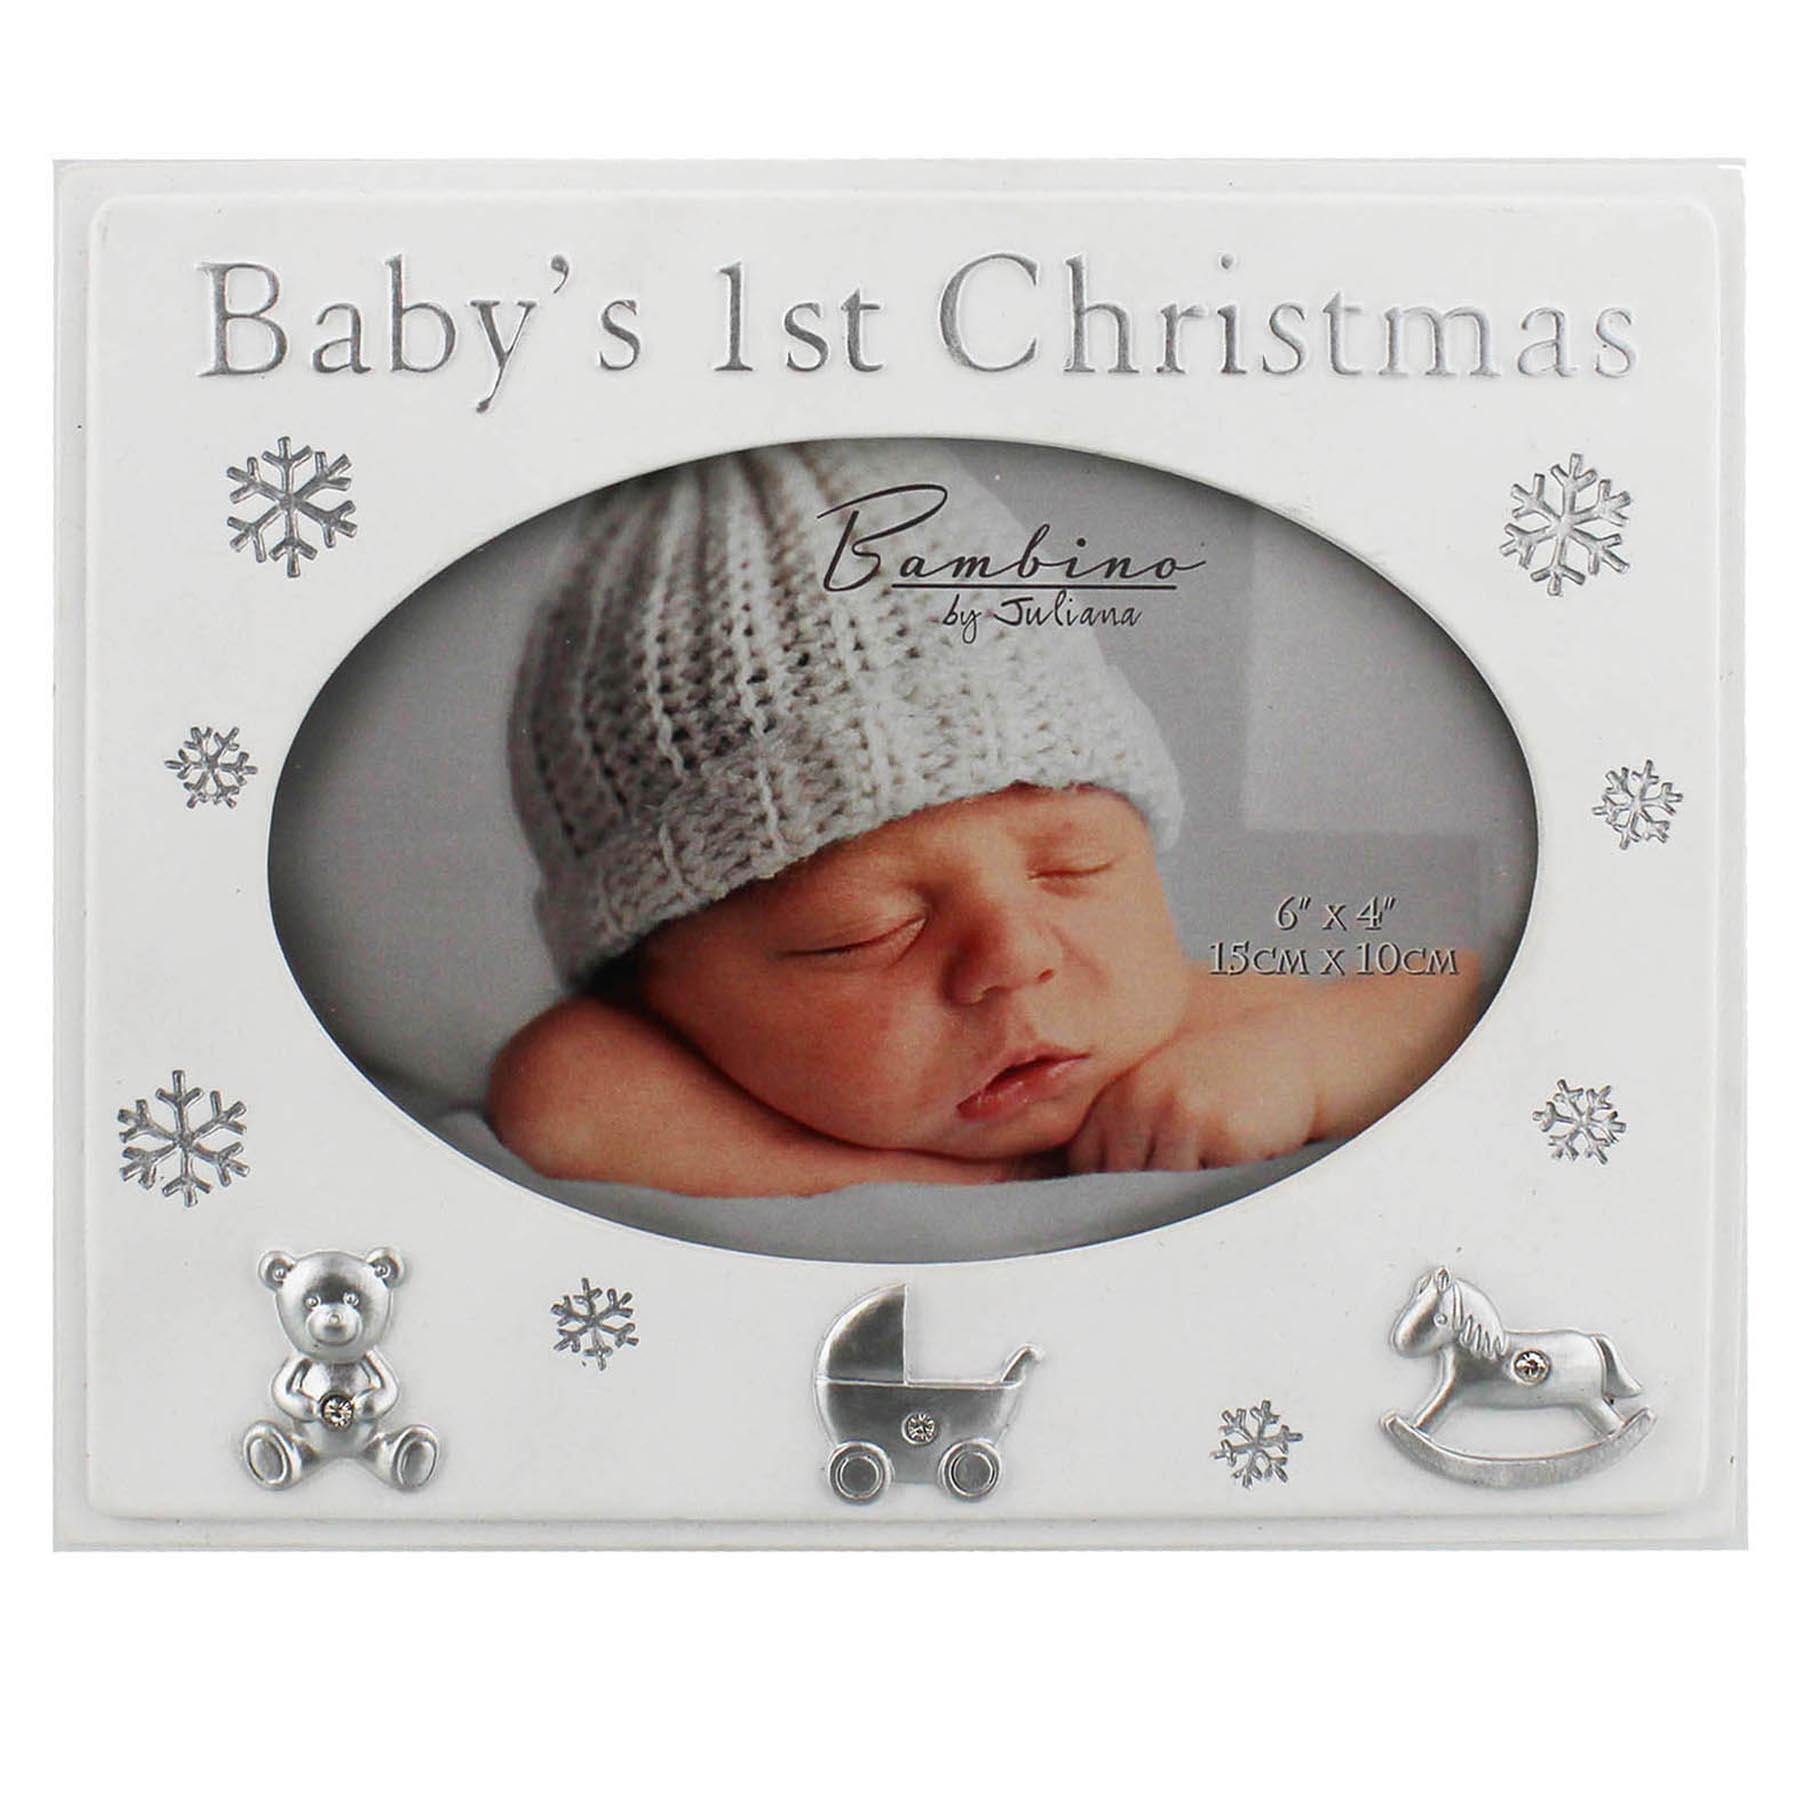 Baby's 1st Christmas 4x6 Resin Photo Frame - White and Silver